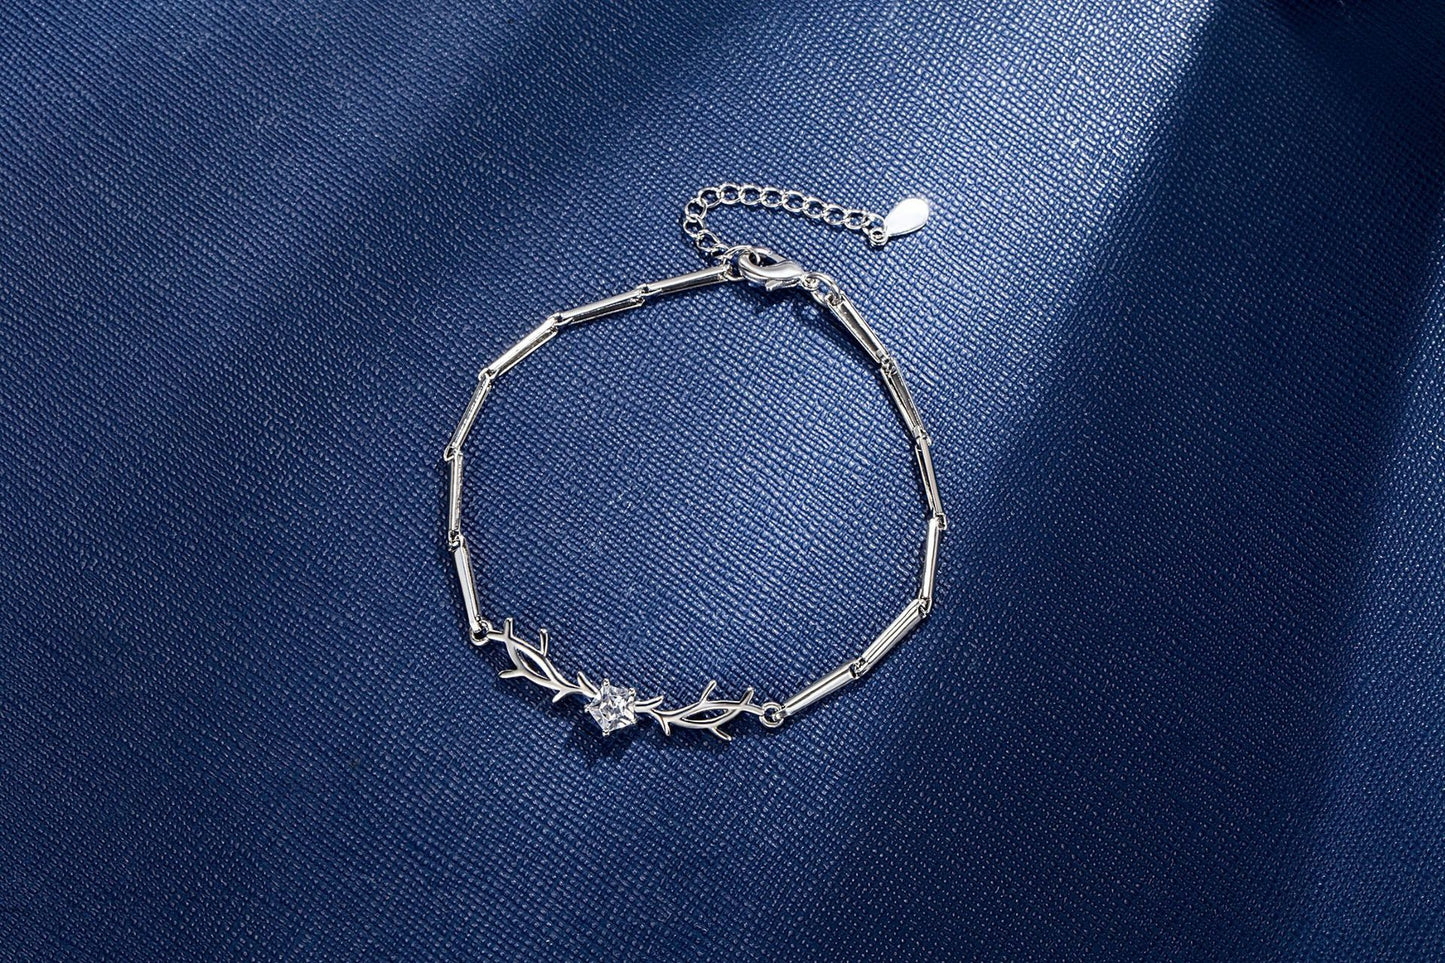 Crystal Zircon Antlers Bracelet (Artificial Silver Plated)